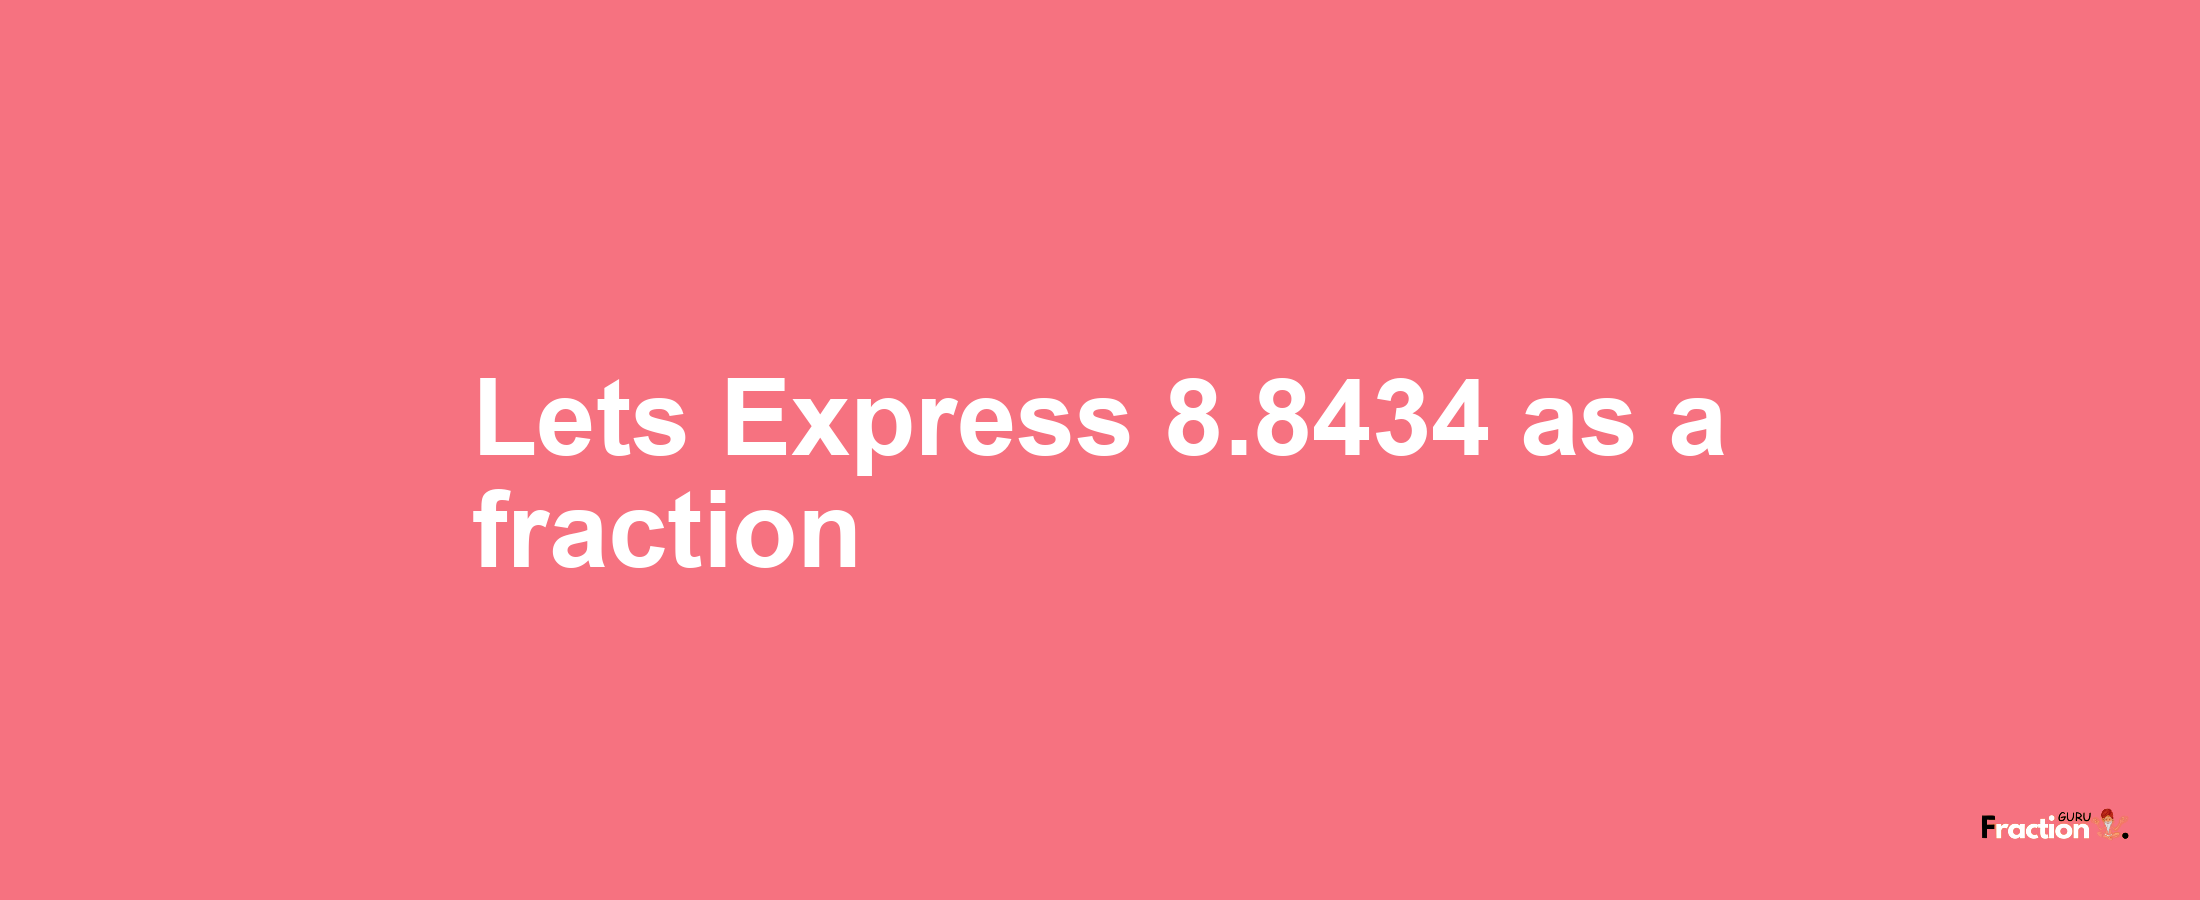 Lets Express 8.8434 as afraction